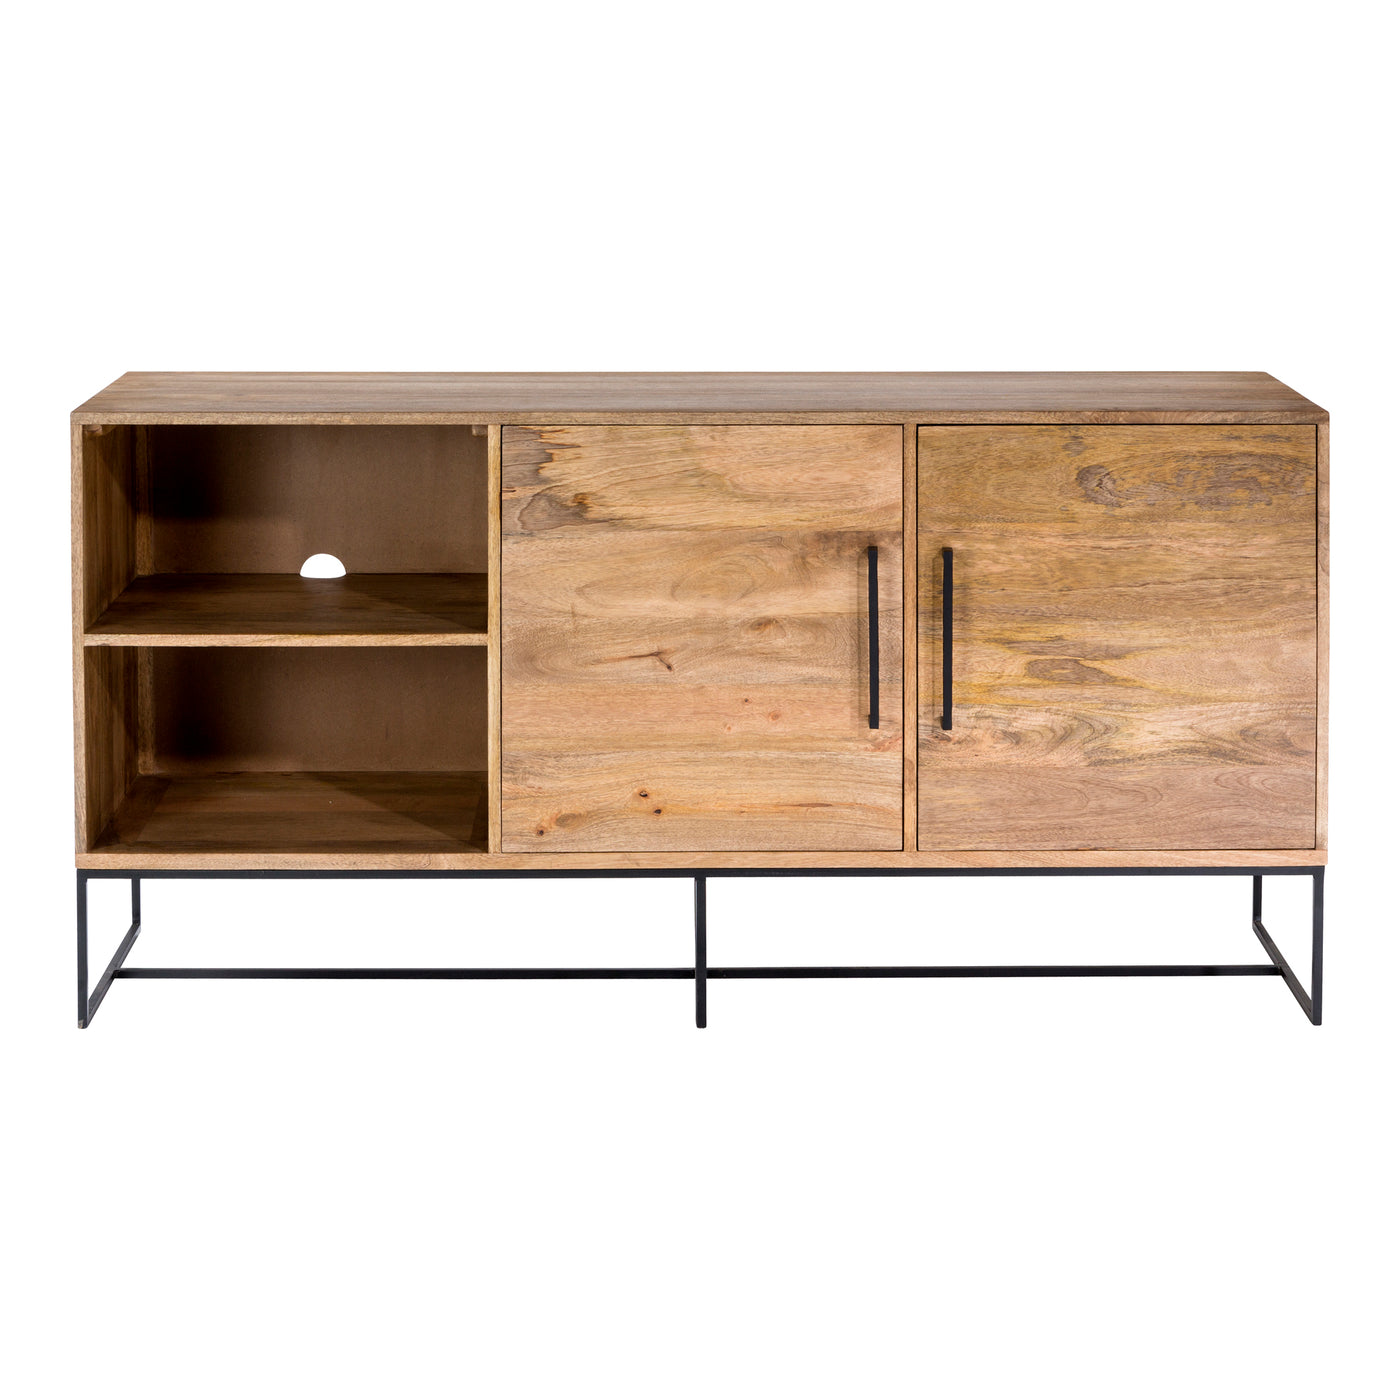 The Colvin Entertainment Unit features sharp, clean lines complete with iron detailing to accompany its industrial design....